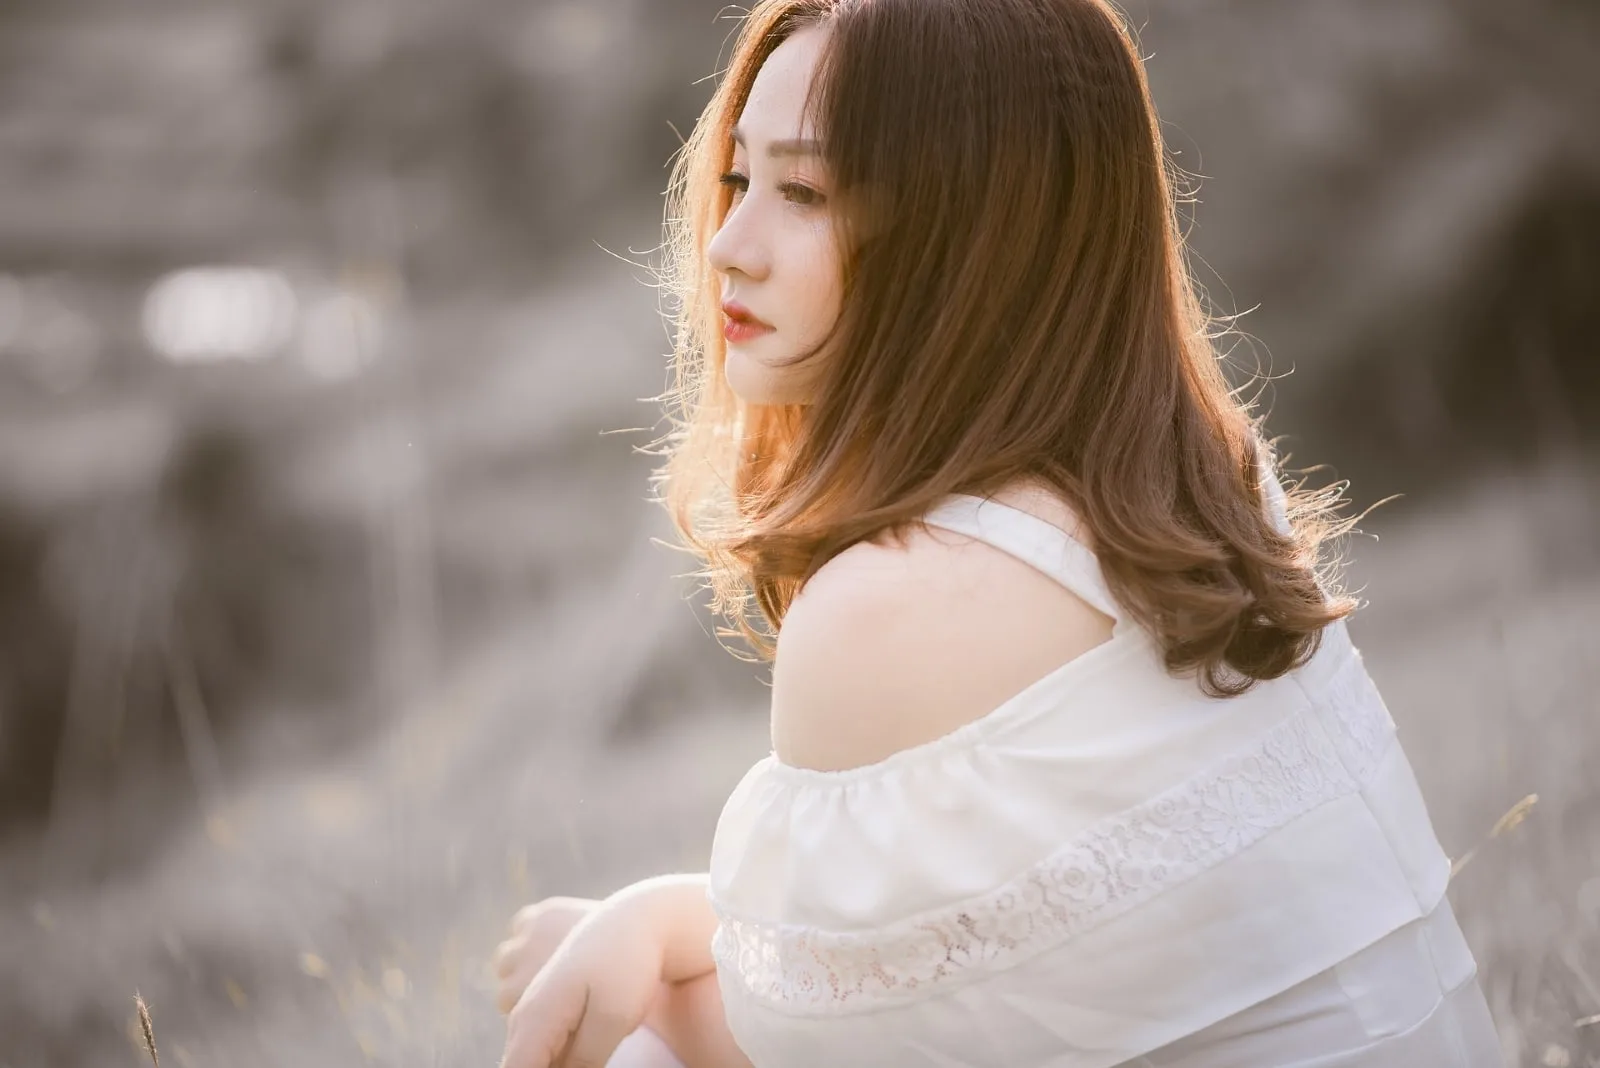 sad woman in white top sitting outdoor